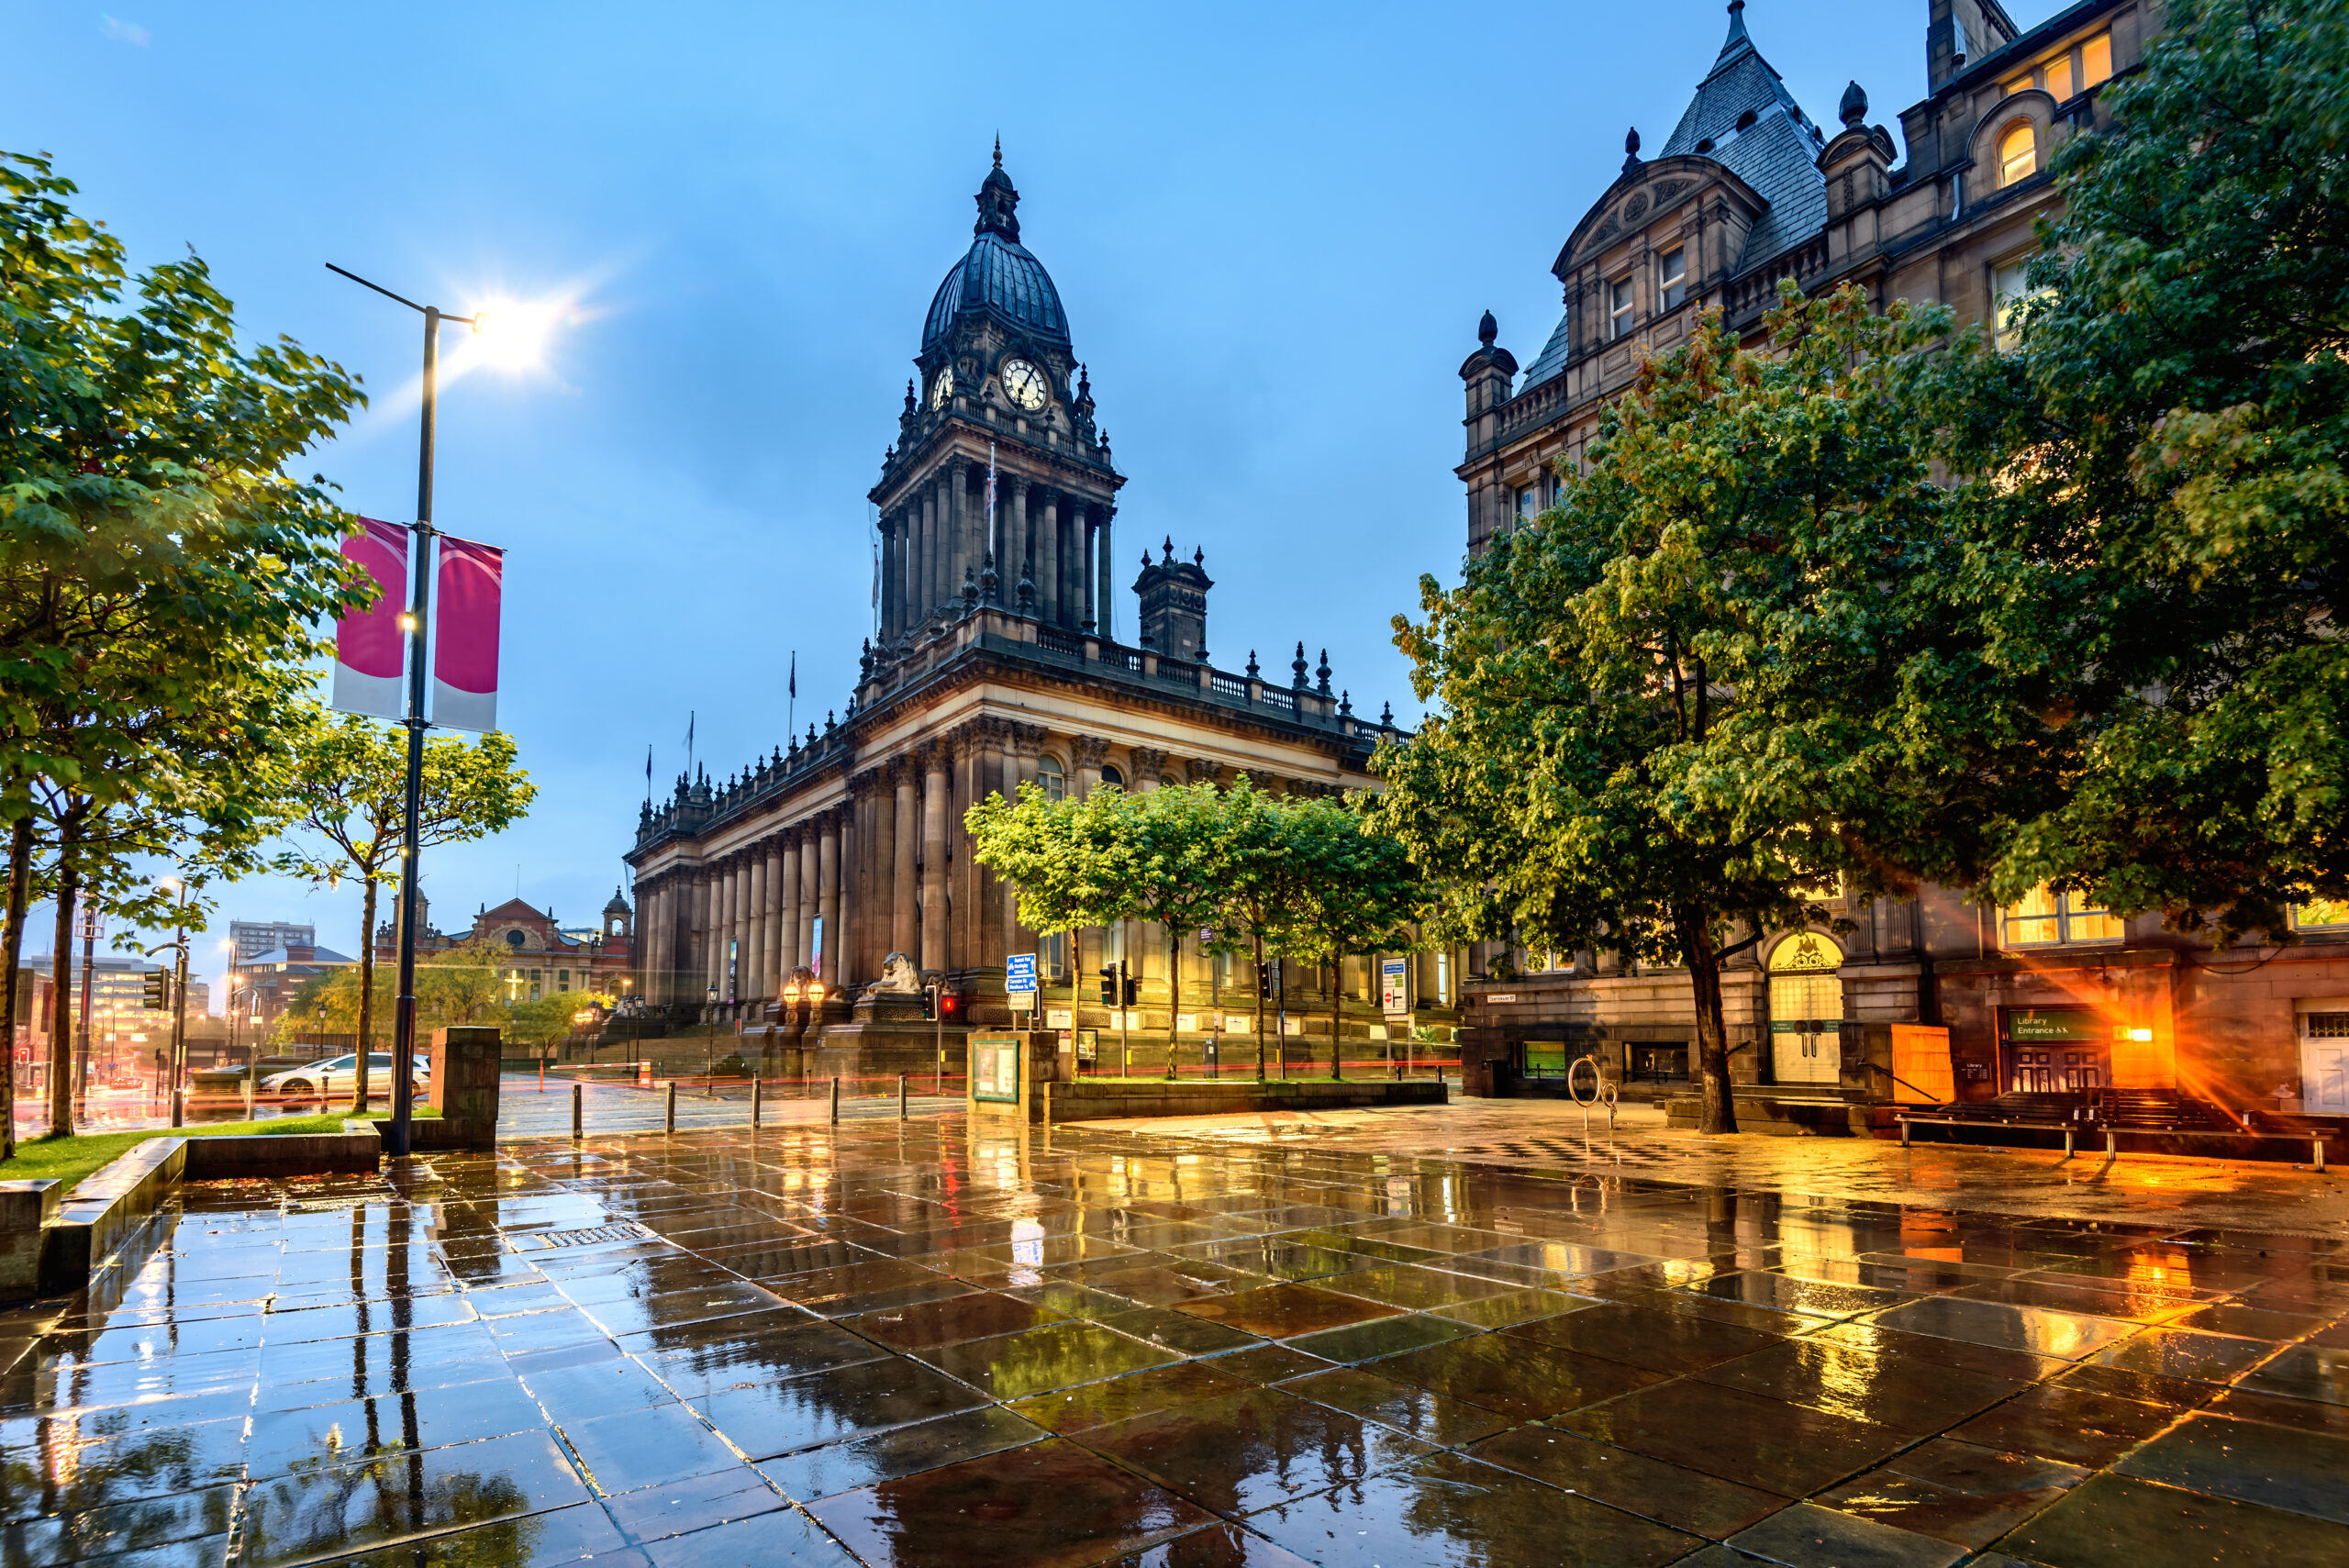 Image of the Town Hall in Leeds where we do Pat Testing